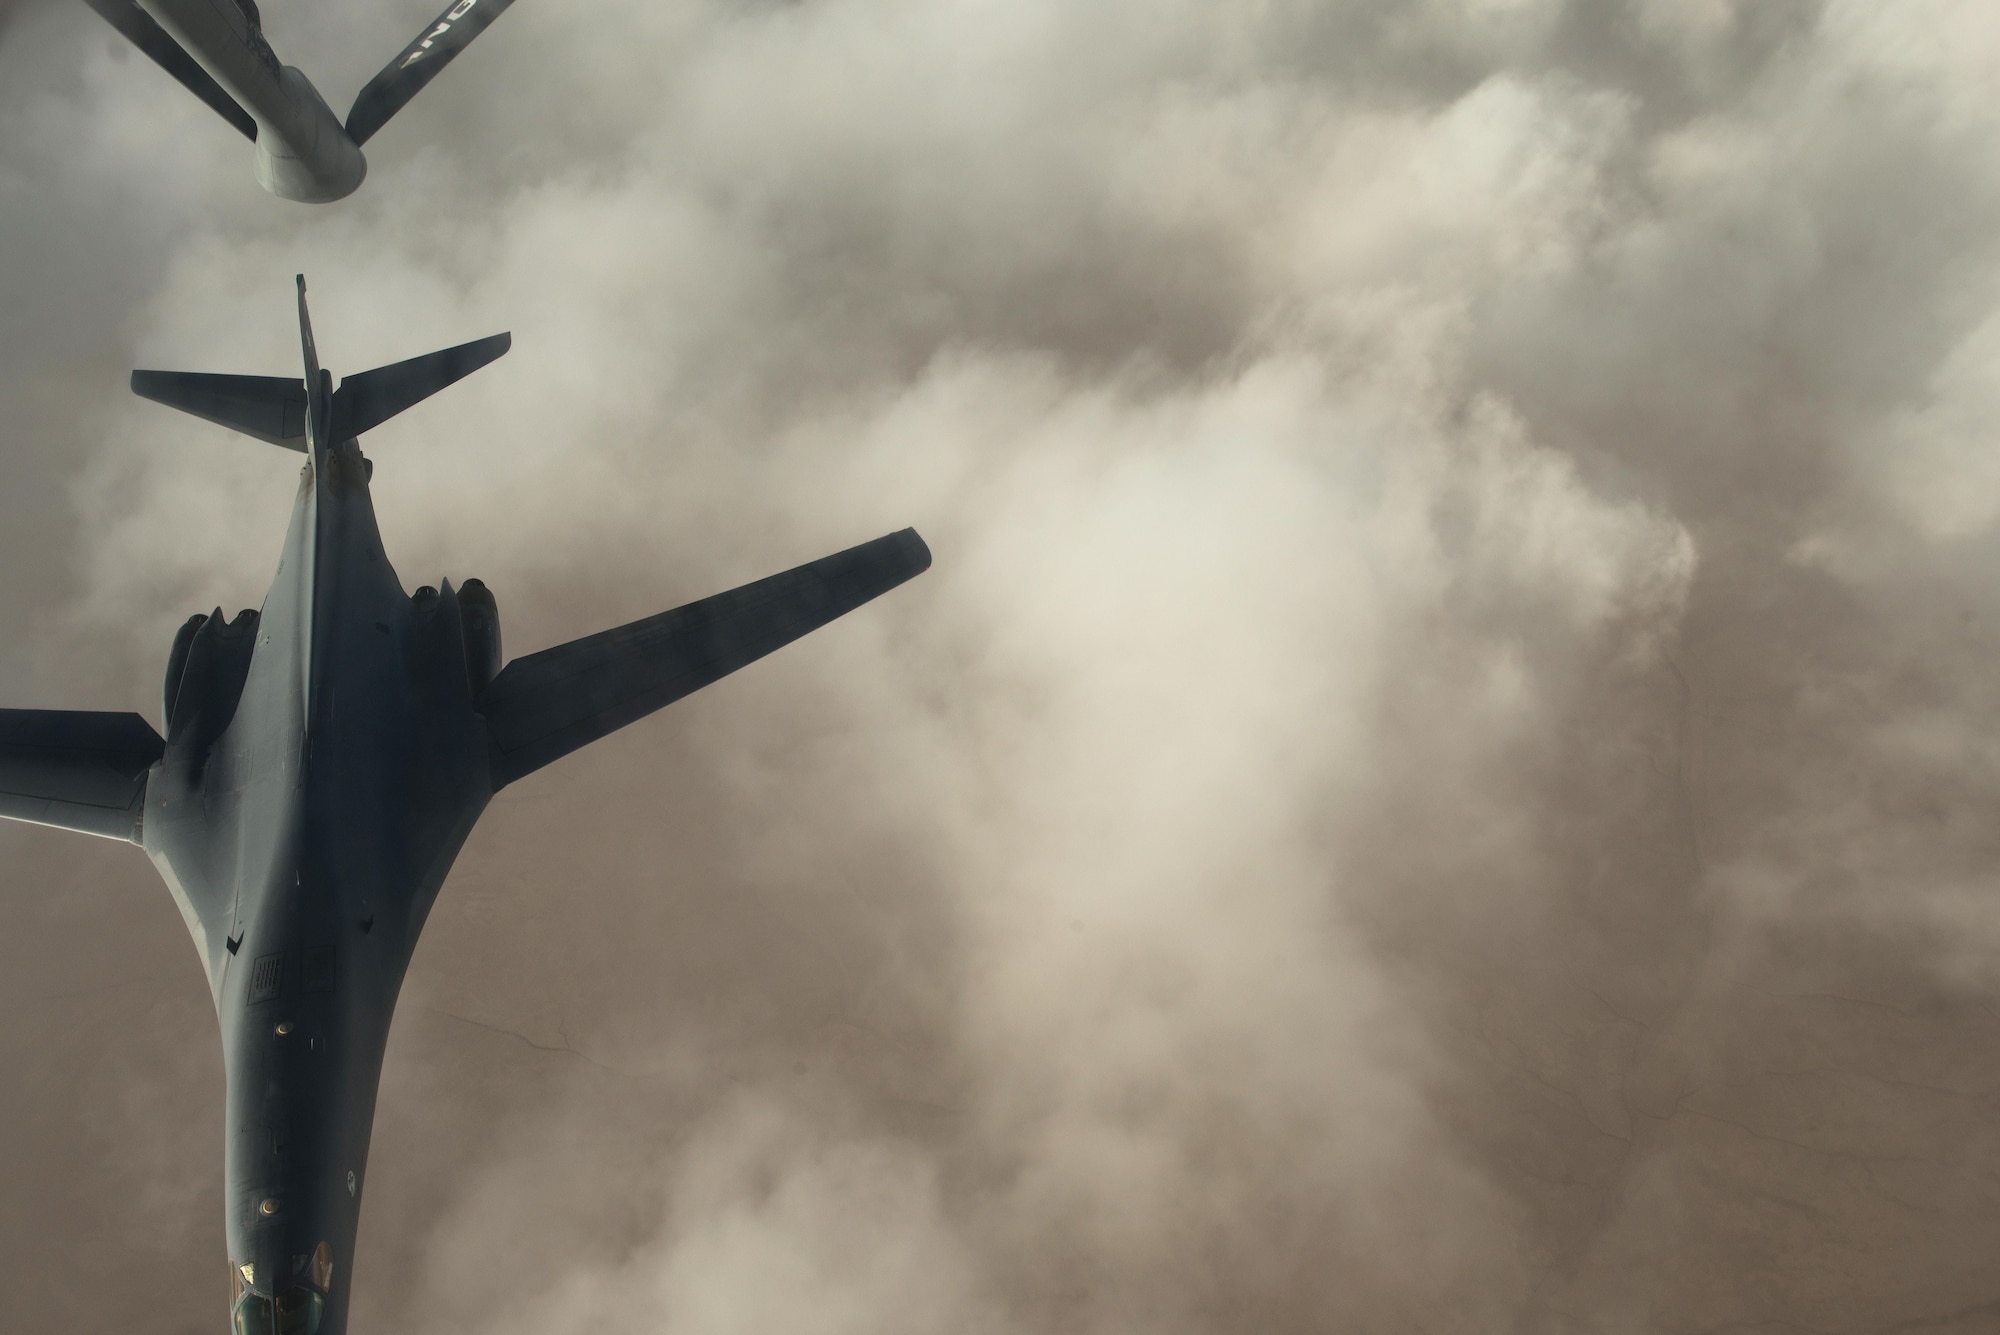 A U.S. Air Force B-1 Bomber separates from the boom pod after receiving fuel from an Air National Guard KC-135 Stratotanker that is deployed to the 340th Expeditionary Air Refueling Squadron at Al Udeid Air Base, Qatar over Iraq September 16, 2015. (U.S. Air Force photo/Staff Sgt. Alexandre Montes)  